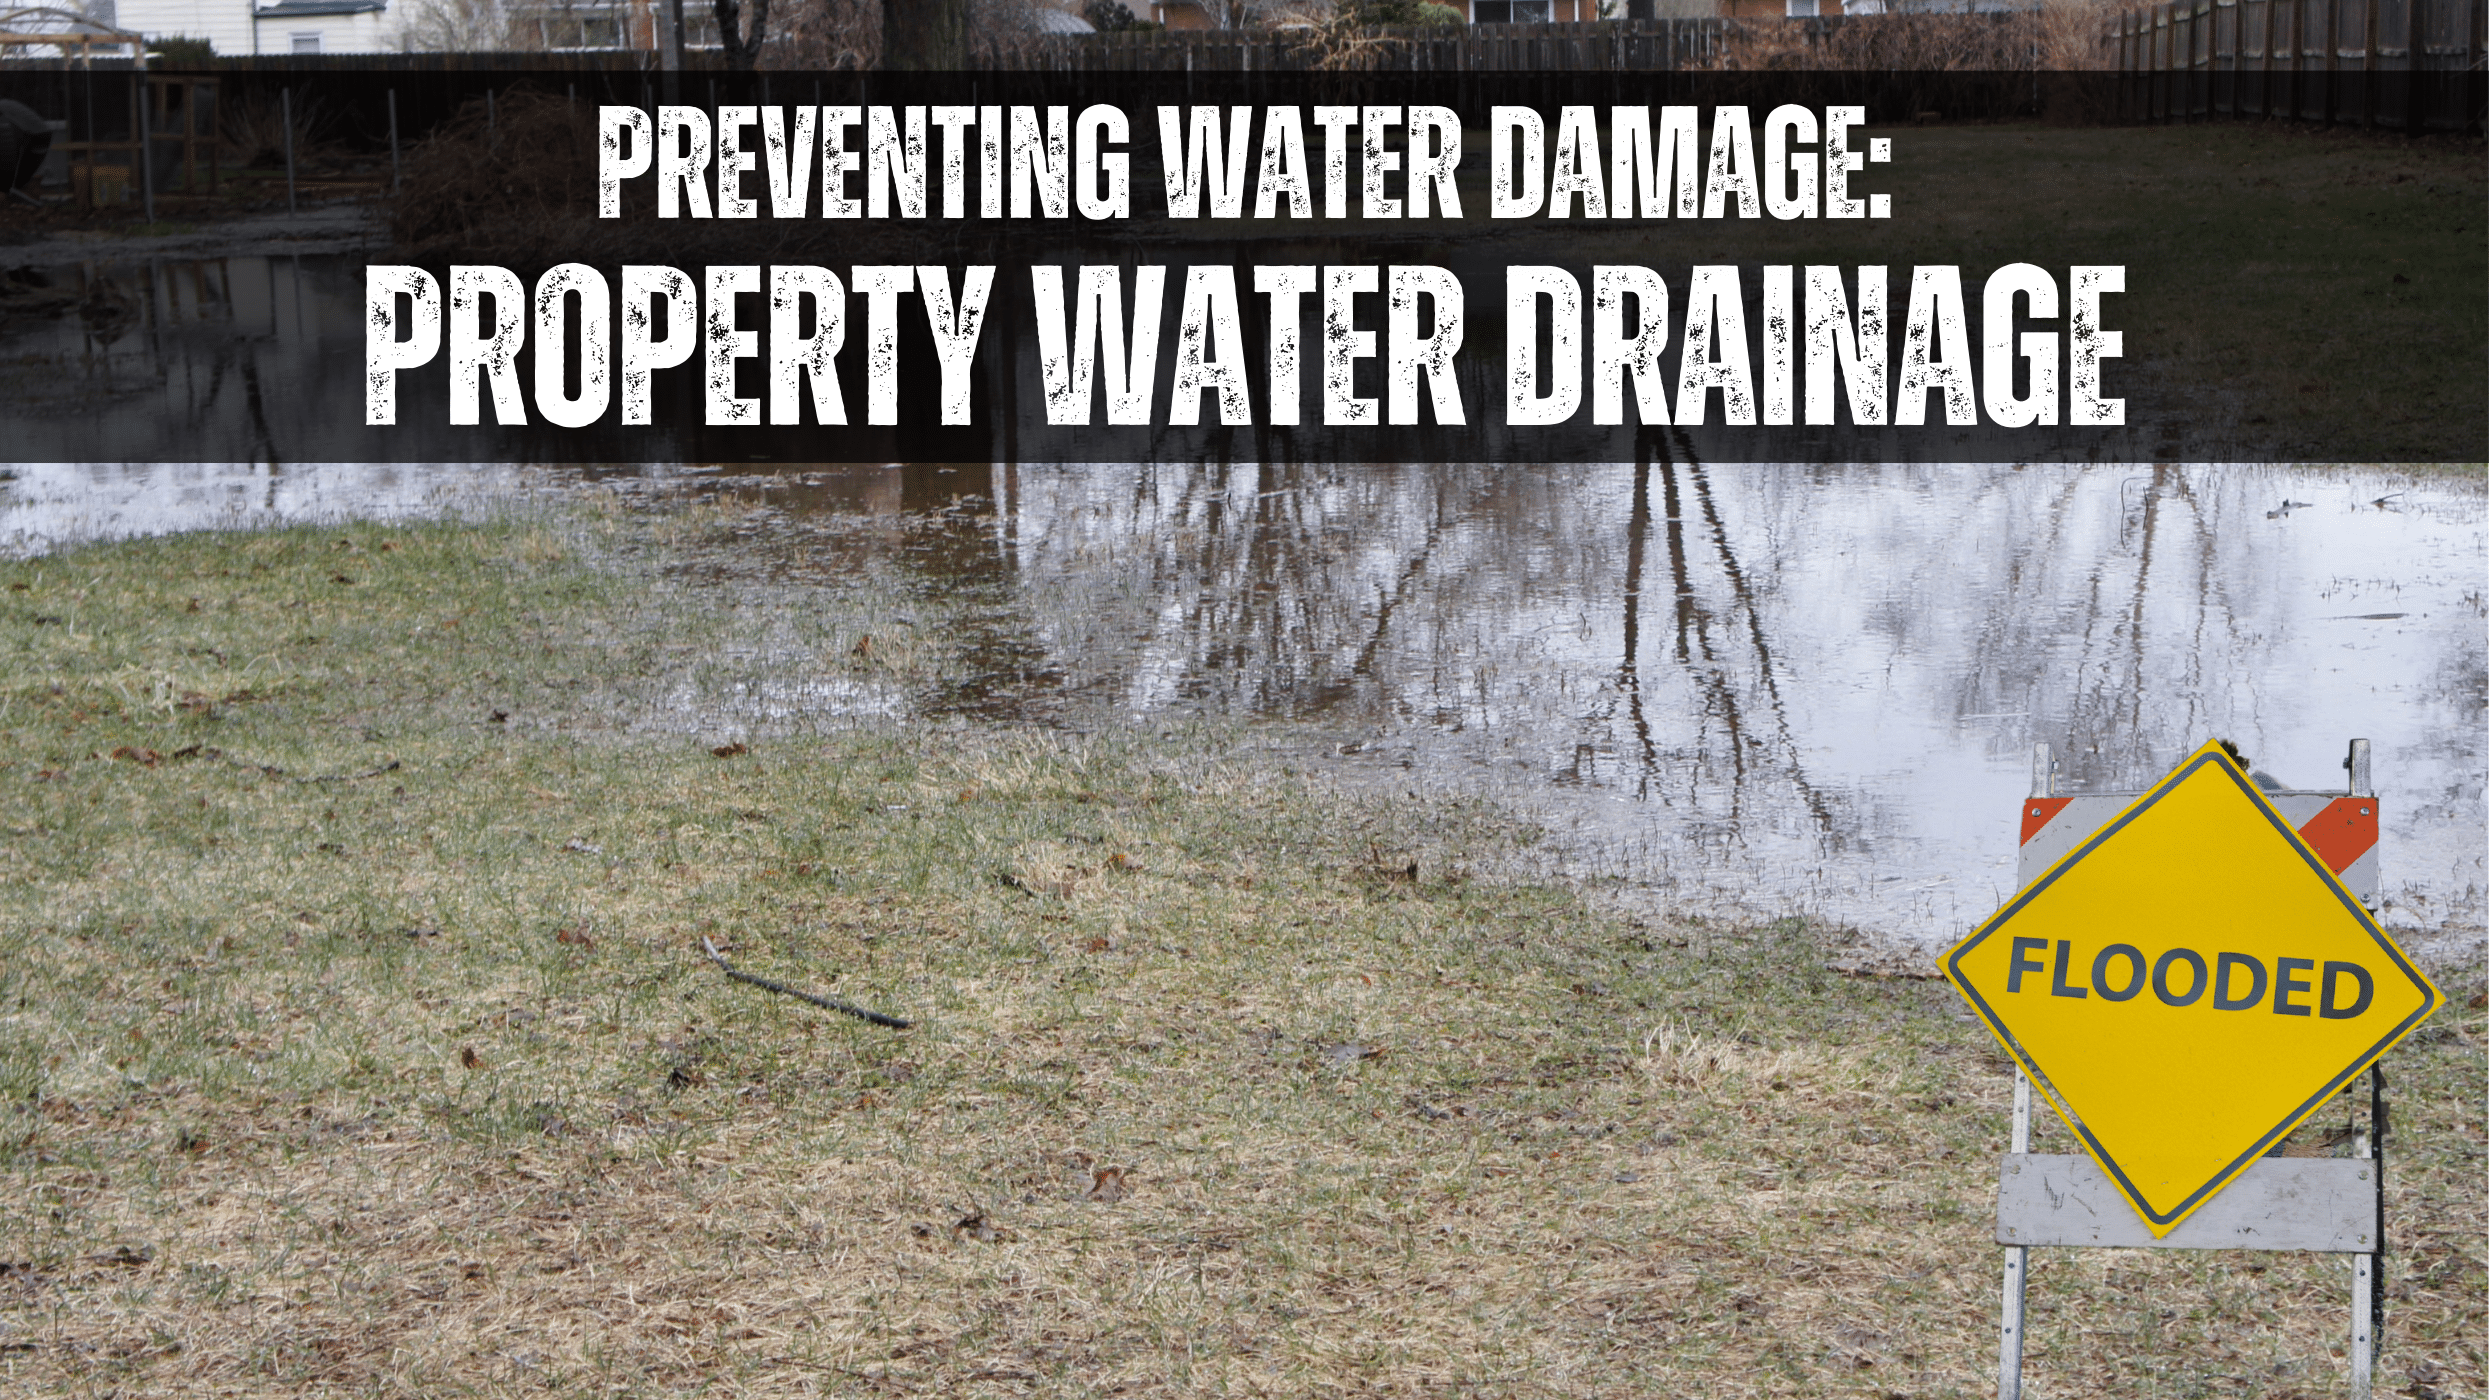 how to prevent water damage, property water drainage systems, waterflow management on property